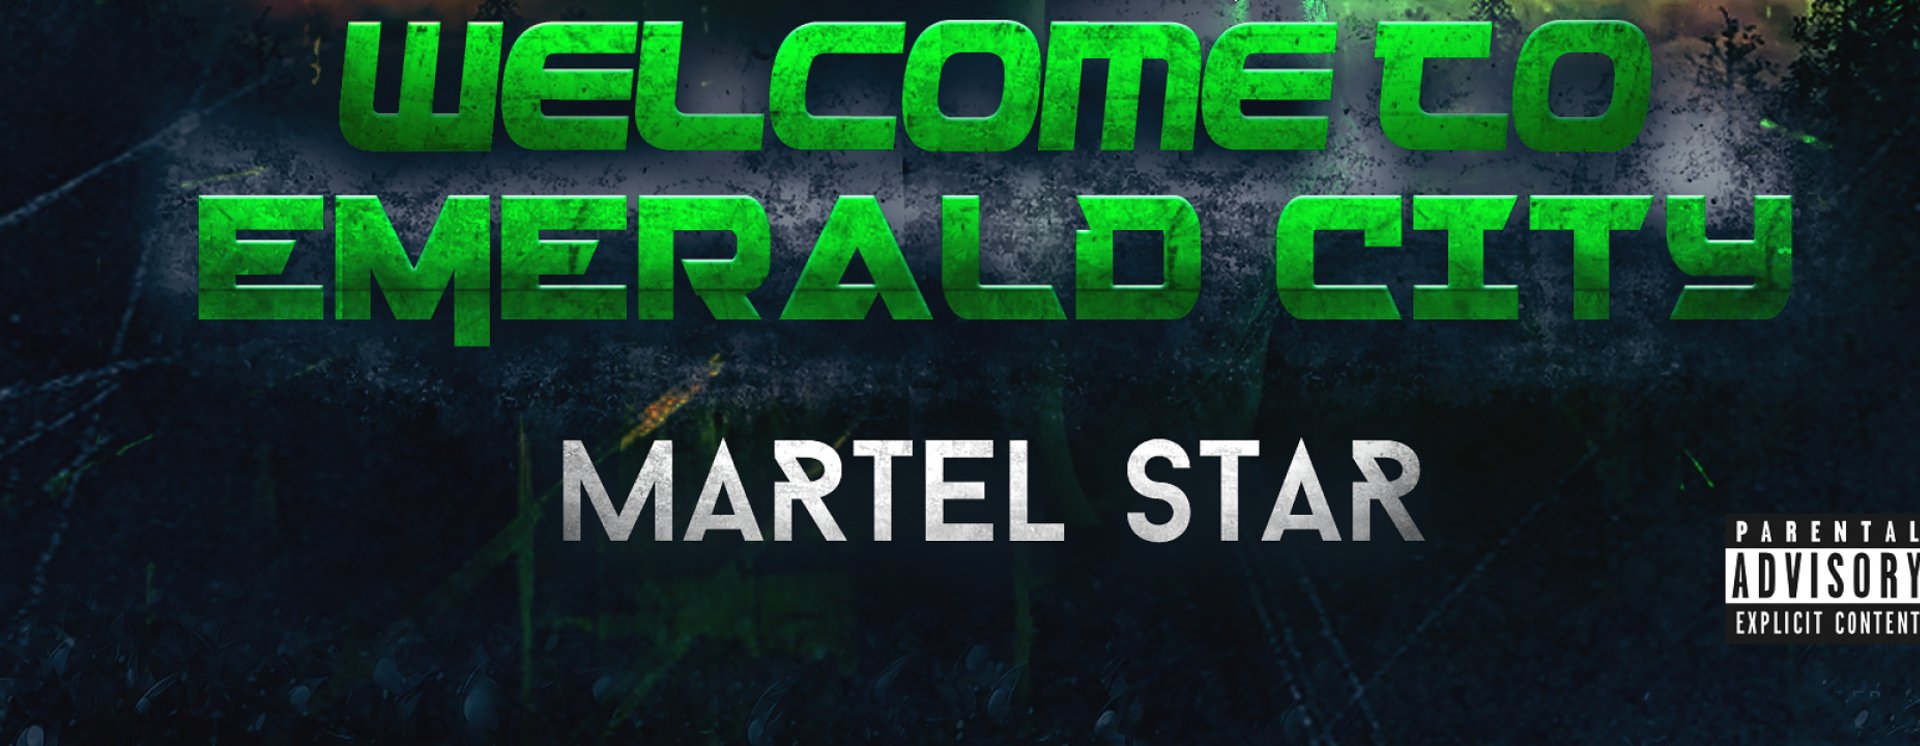 Welcome to emerald city copy